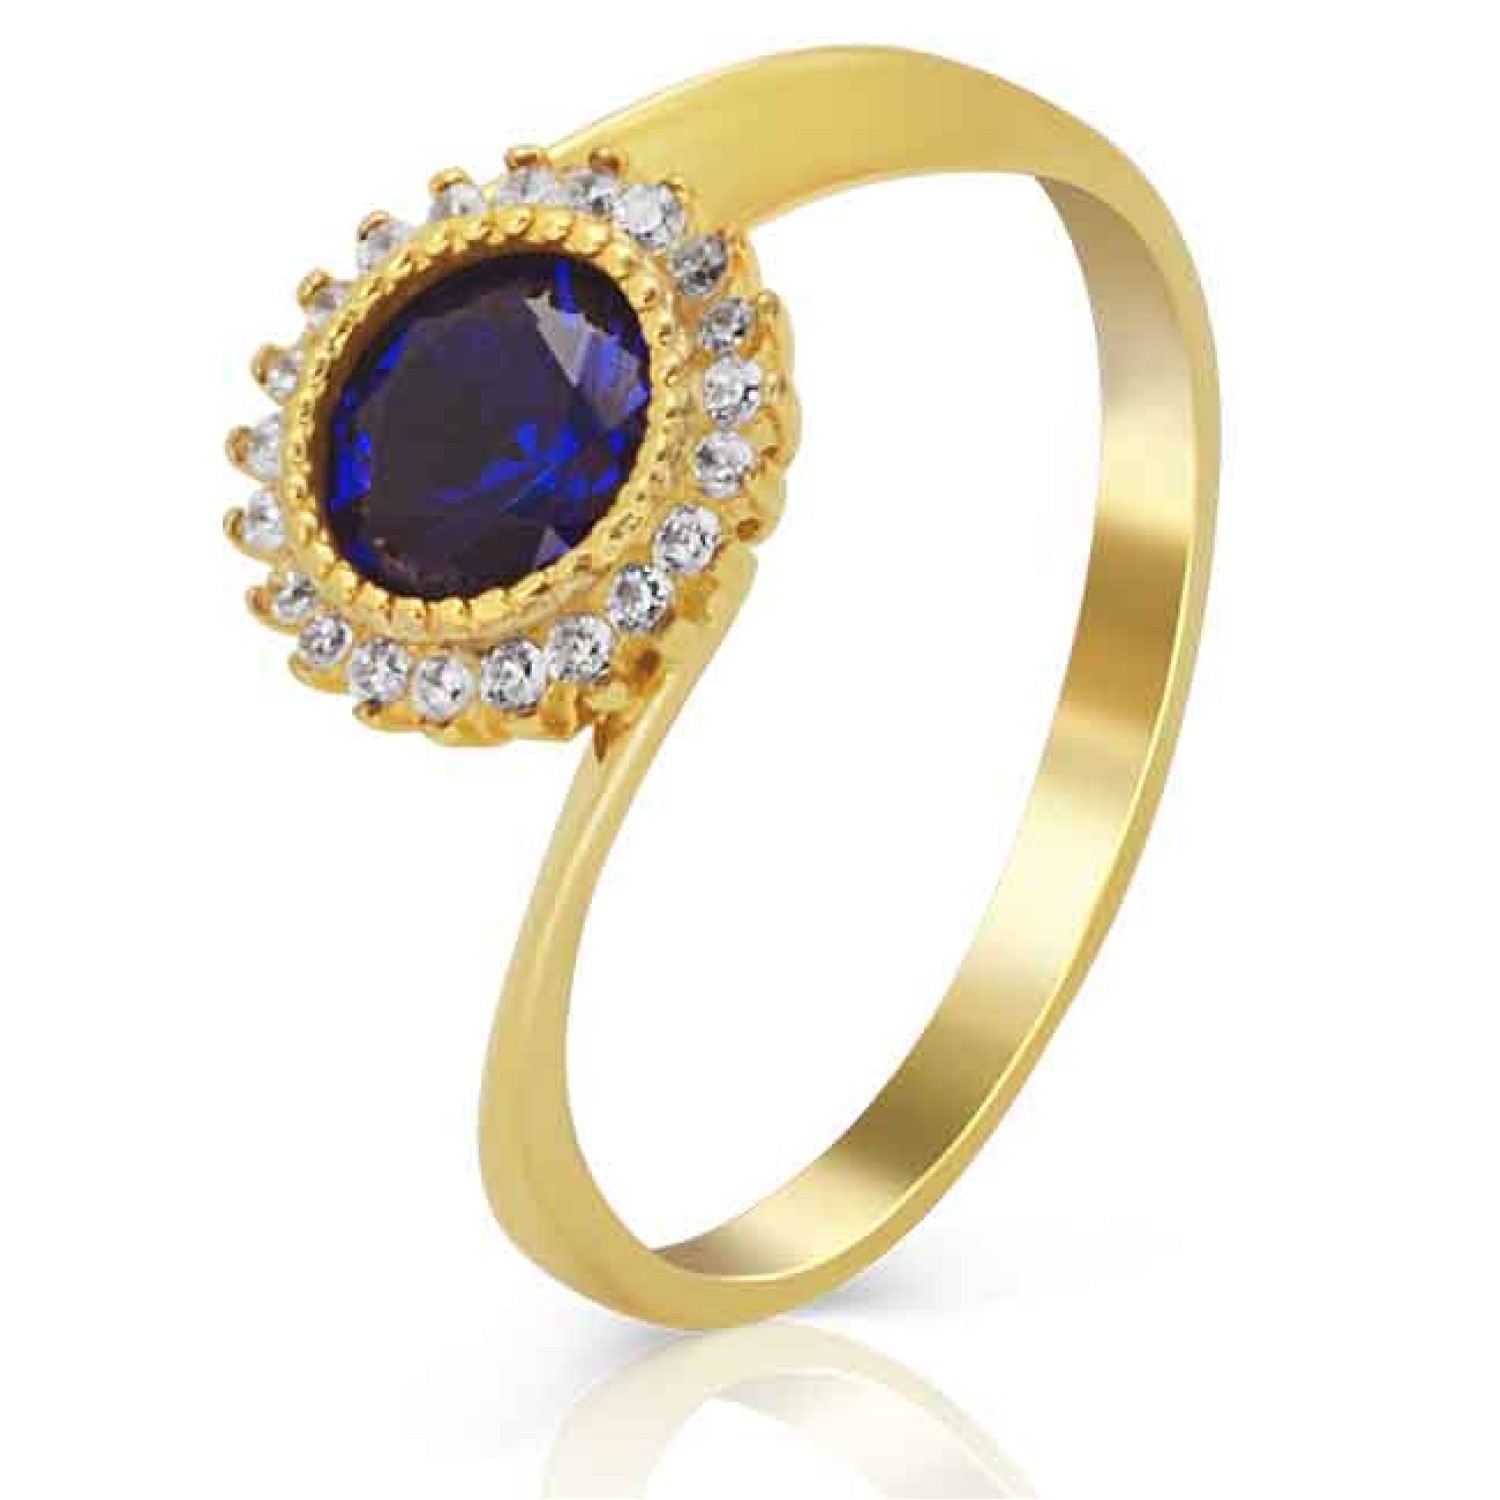 9ct Yellow Gold and Sapphire Coloured Cubic Zirconia Ring. 9ct Yellow Gold and Sapphire Coloured Cubic Zirconia Ring 9ct Gold Set with Sapphire coloured Cubic Zirconia Christies exclusive 5 year guarantee 3 Months No Payments and Interest for Q Card holde